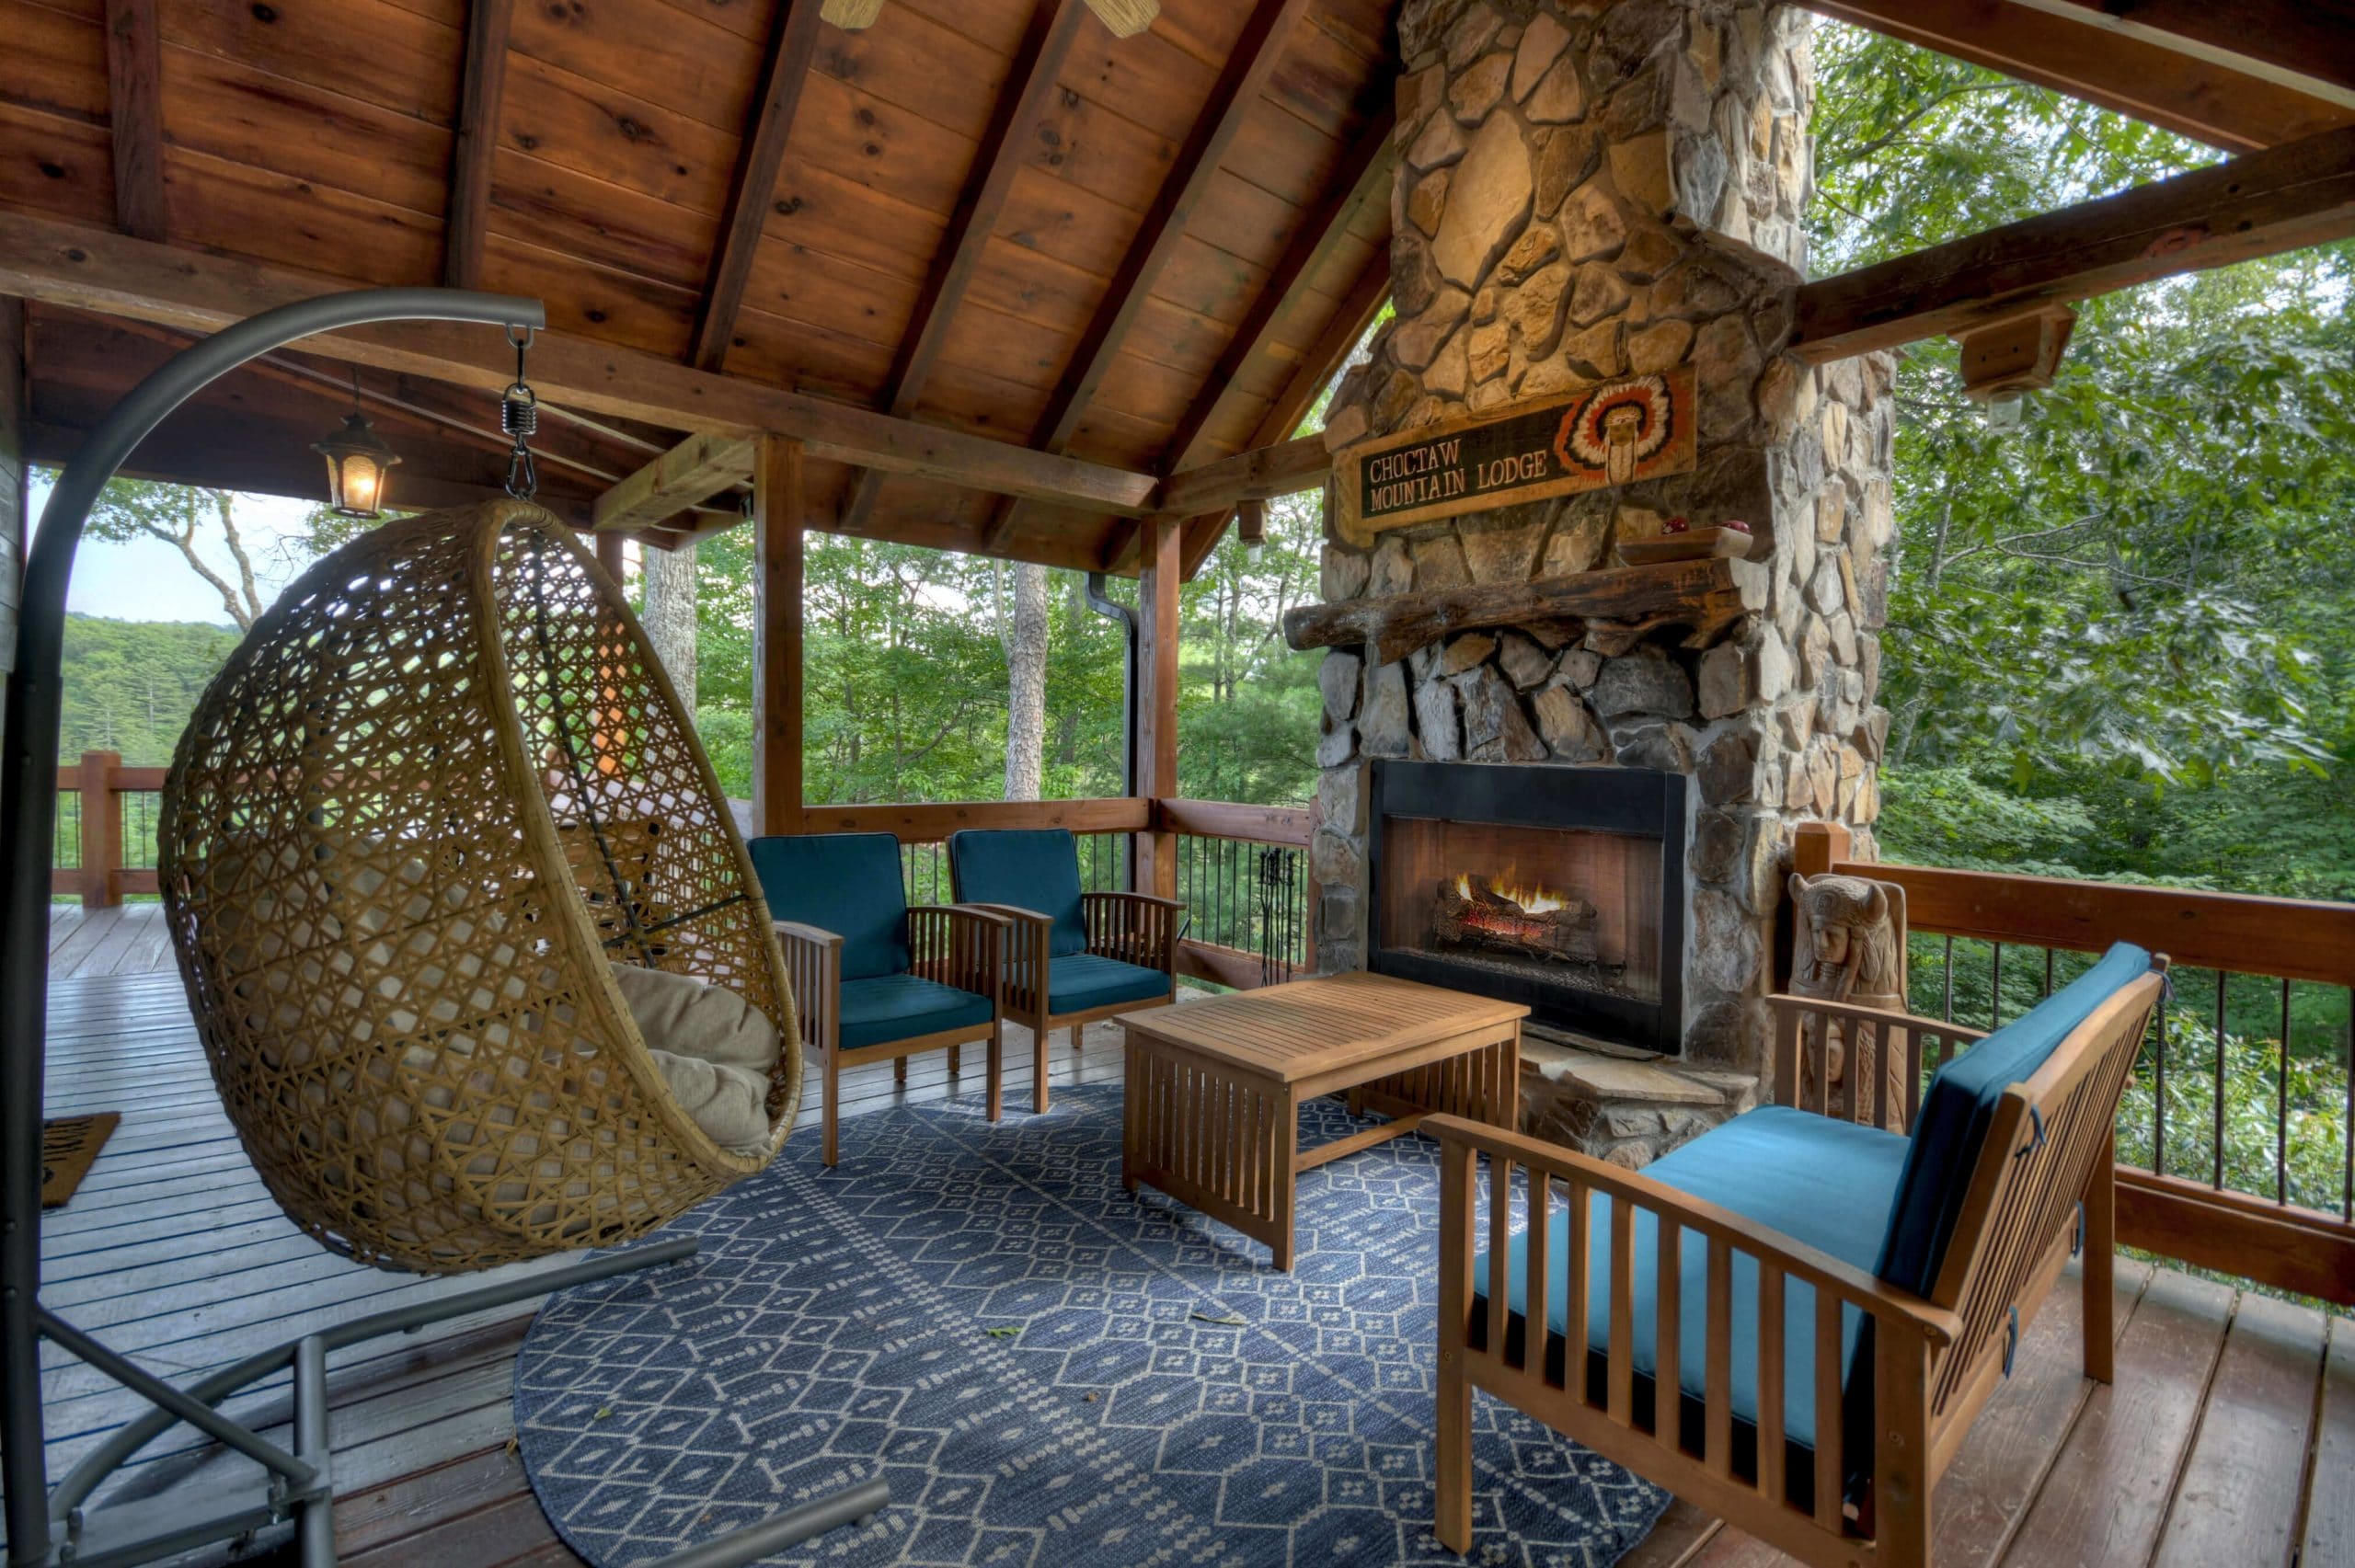 Choctaw Mtn Lodge outdoor fireplace with seating area and egg chair